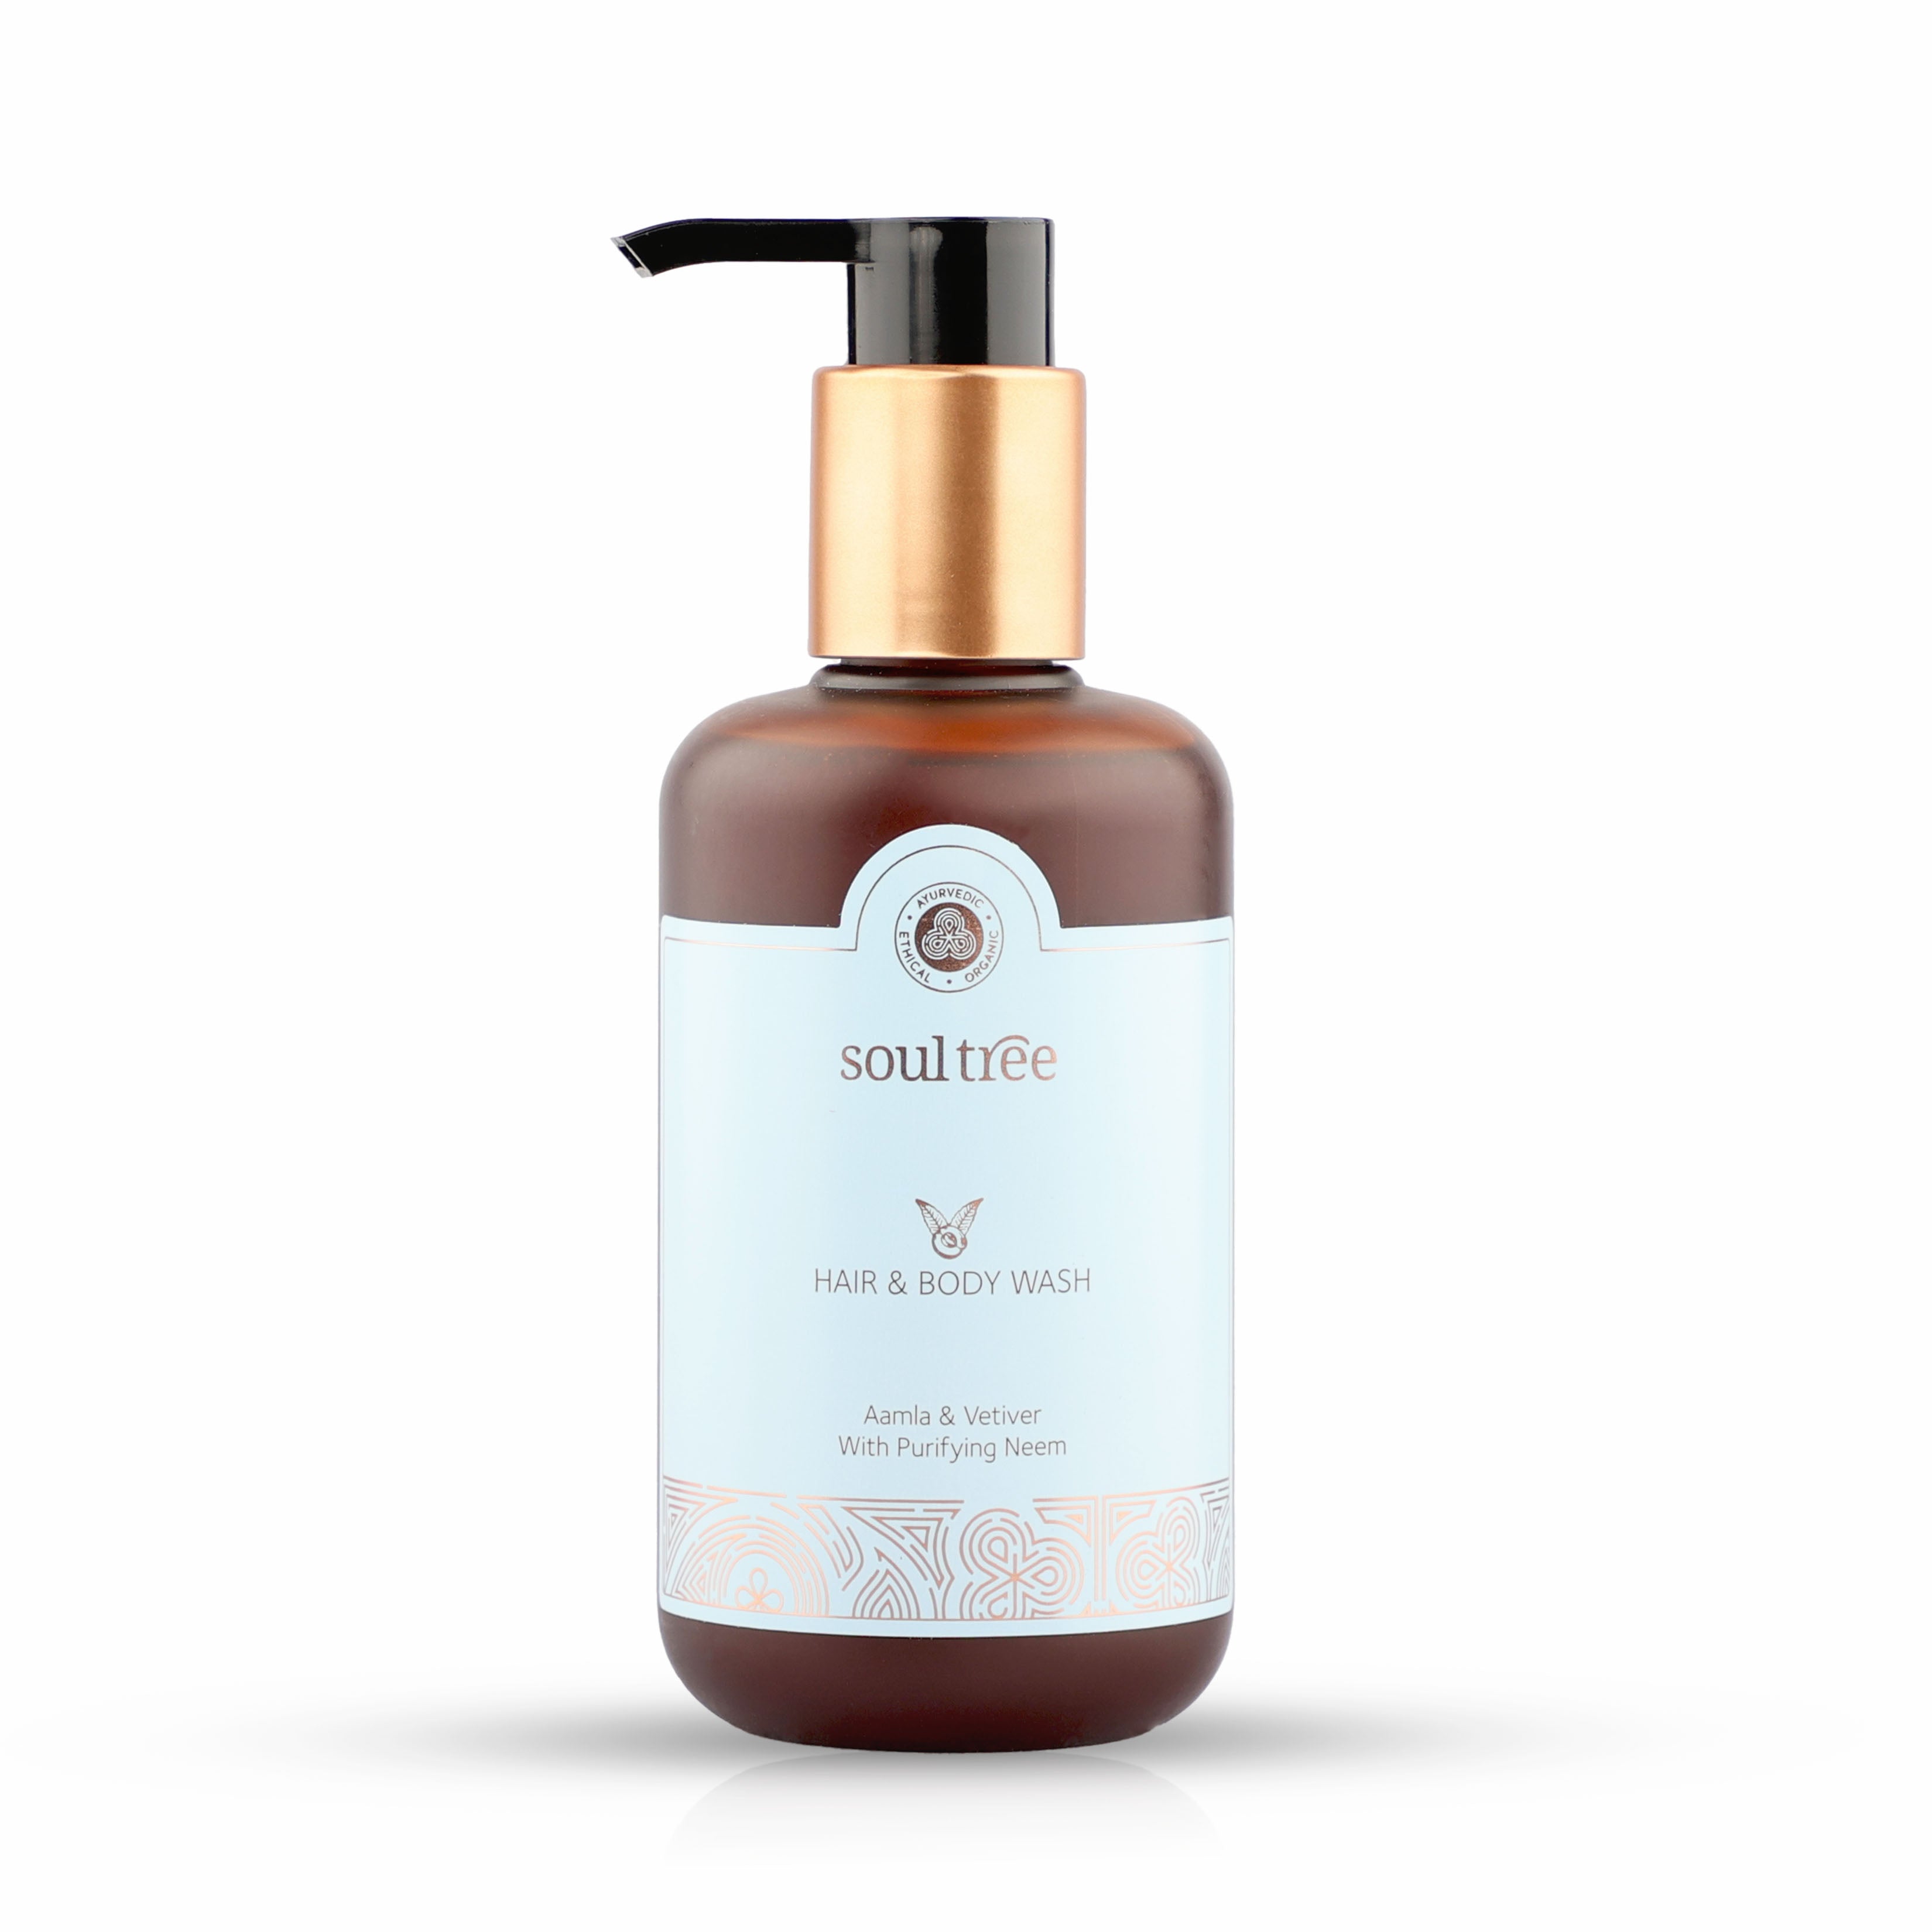 Hair & Body Wash - Aamla & Vetiver with Purifying Neem - SoulTree